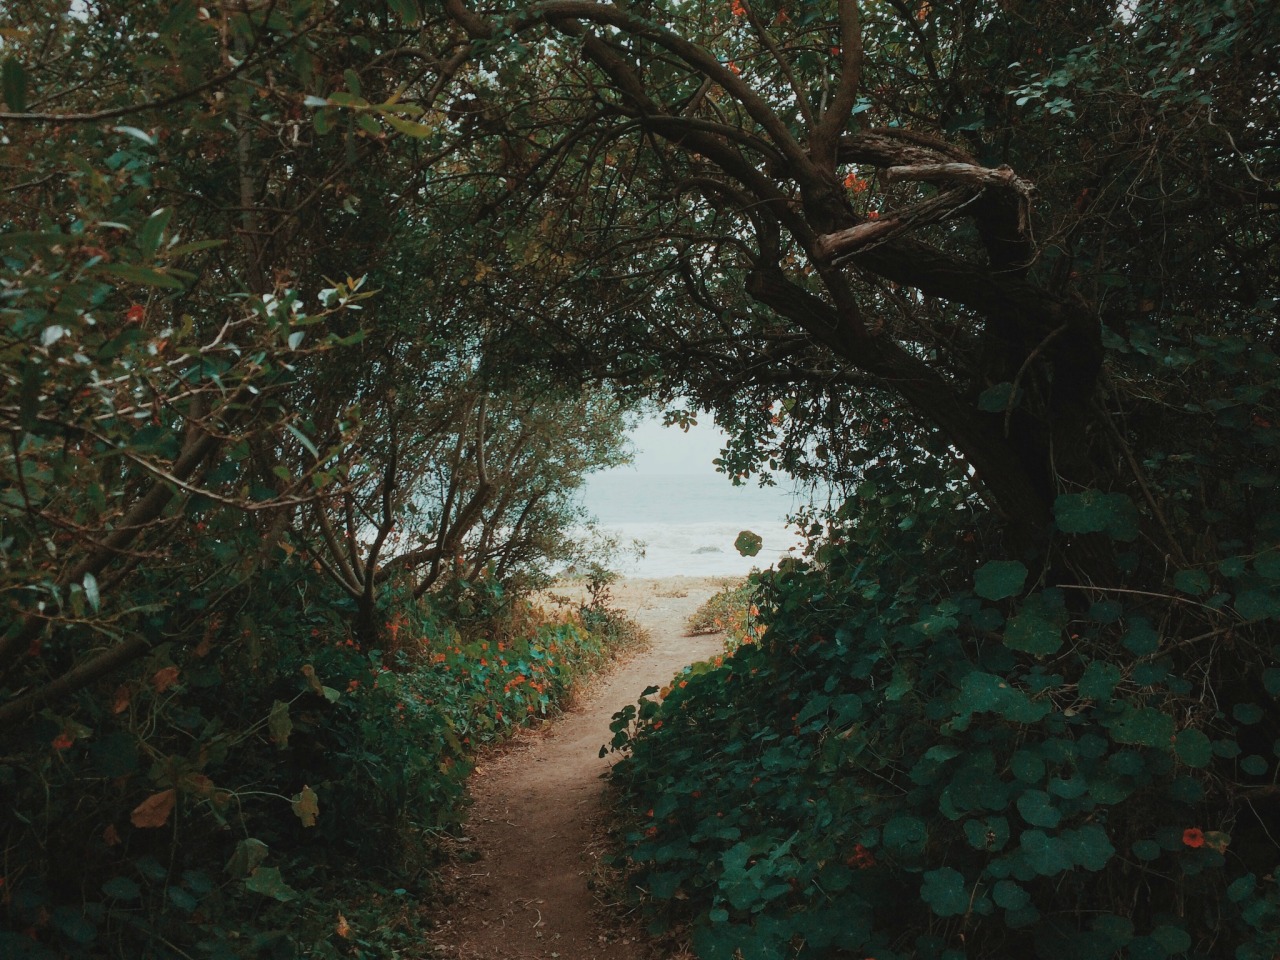 thedeadgameblog:
“ expressions-of-nature:
“ by Kelly Victoria
”
Take me out of this forest,
Out of this tangled mess.
Away from my demons,
Who haunt me at night.
I can see the light ahead,
A beacon of light shining bright.
A view of sand and...